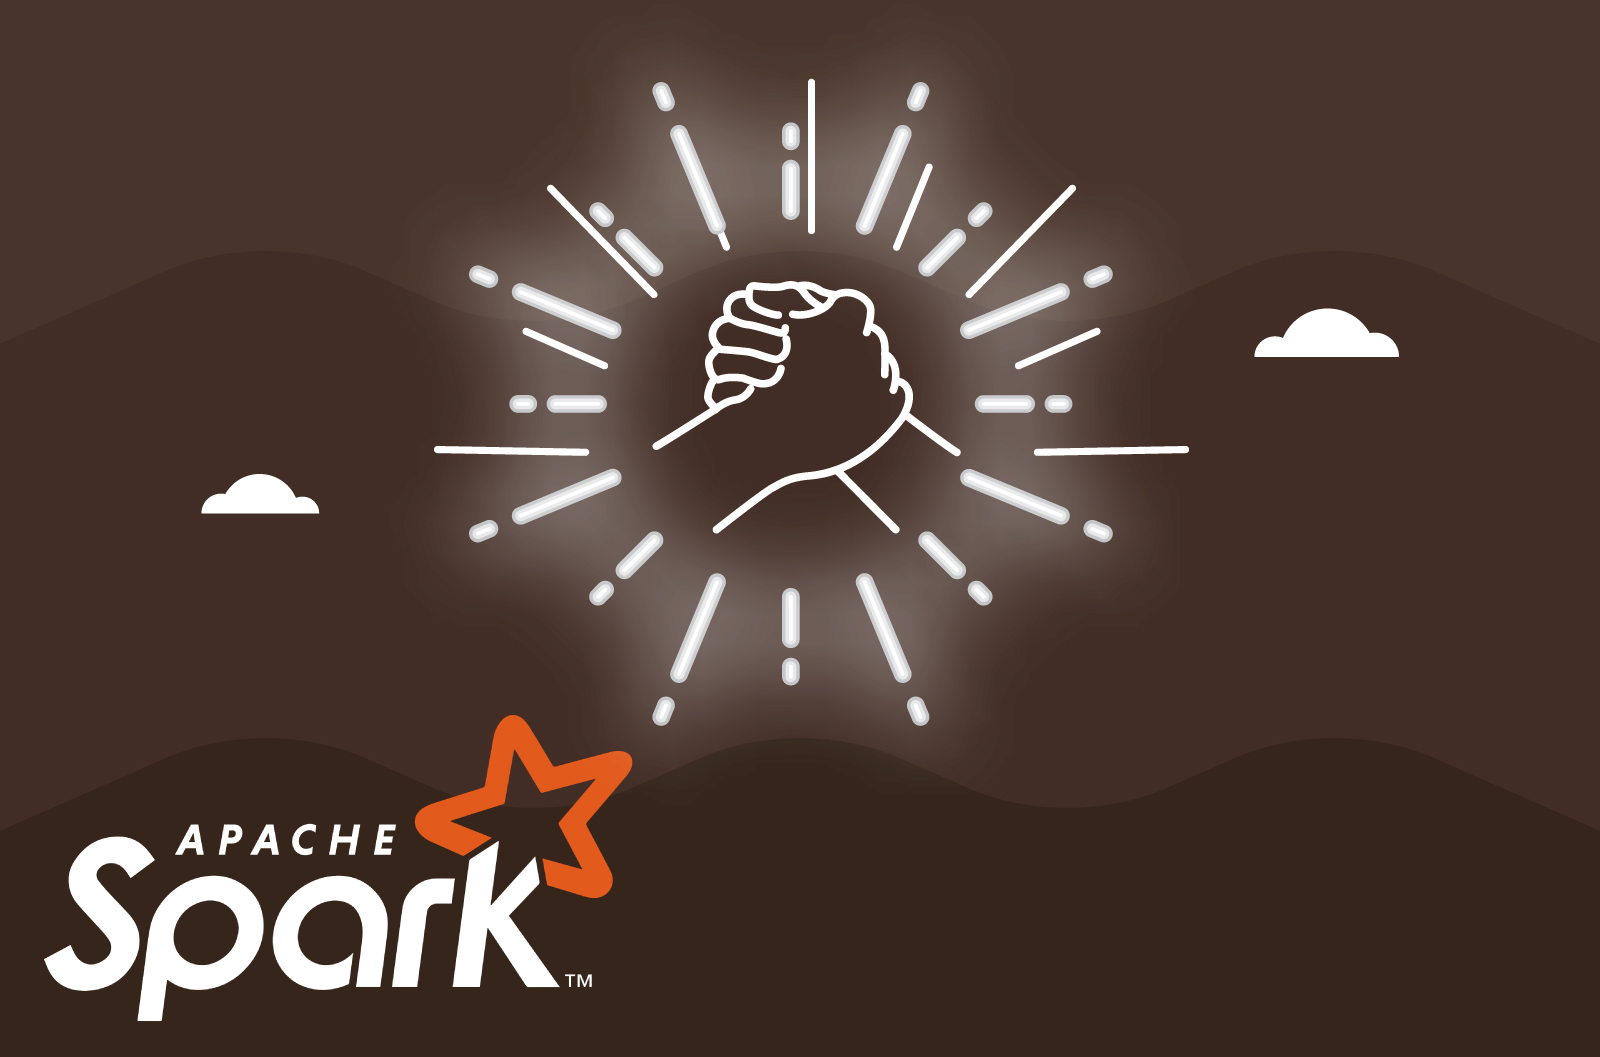 Spark is your friend? – We’ll see about that